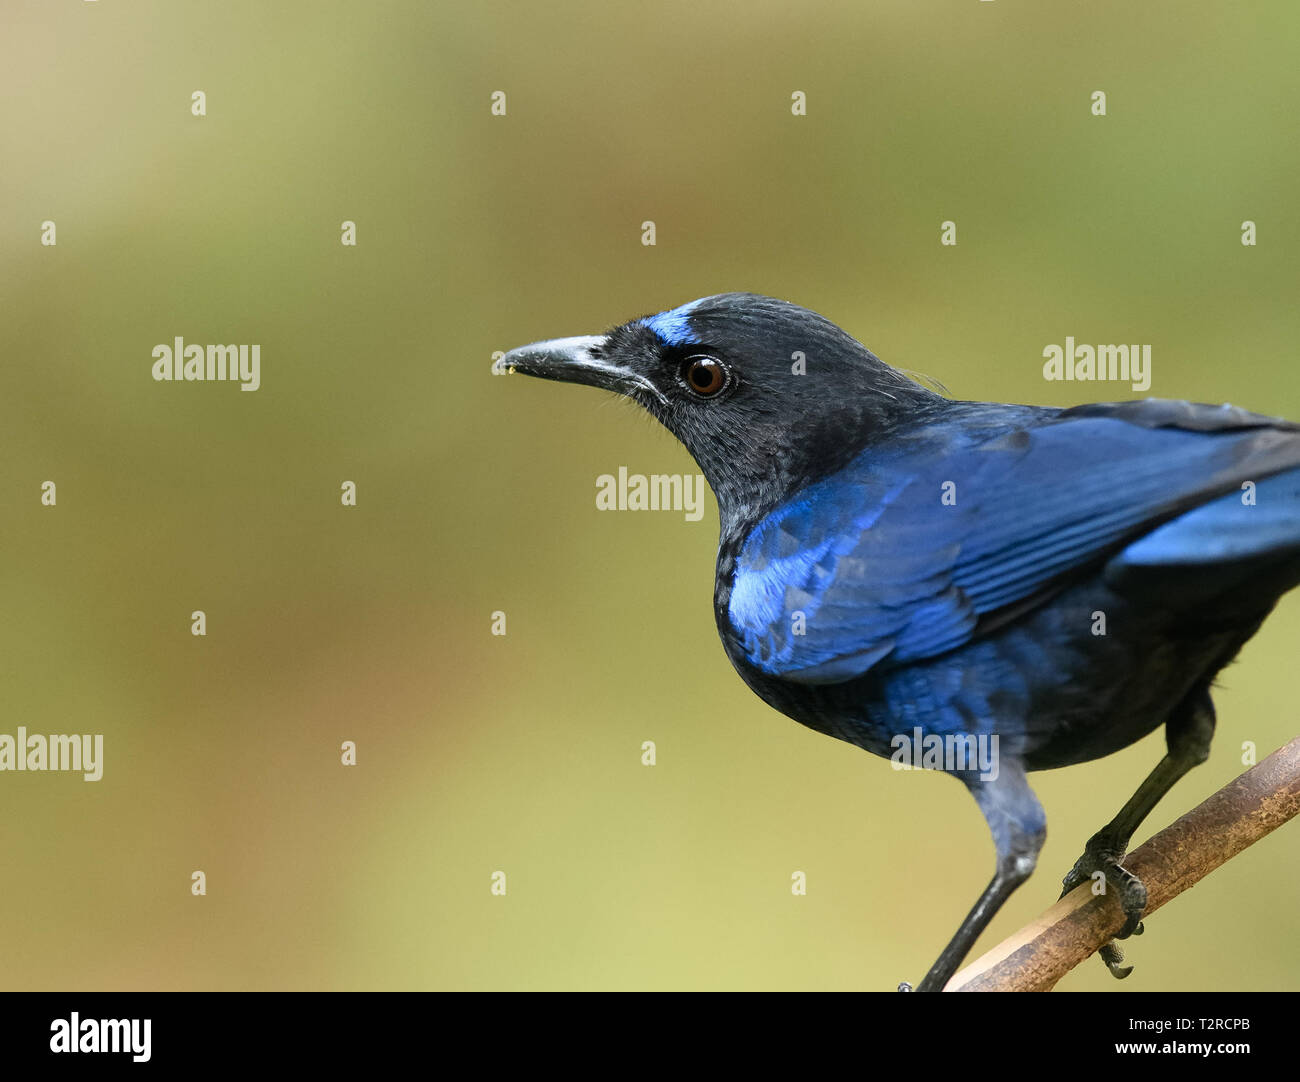 Malabar whistling thrush, Thattekad Bird Sanctuary, also known as Salim Ali Bird Sanctuary, is located in Ernakulam district of Kerala India. Stock Photo